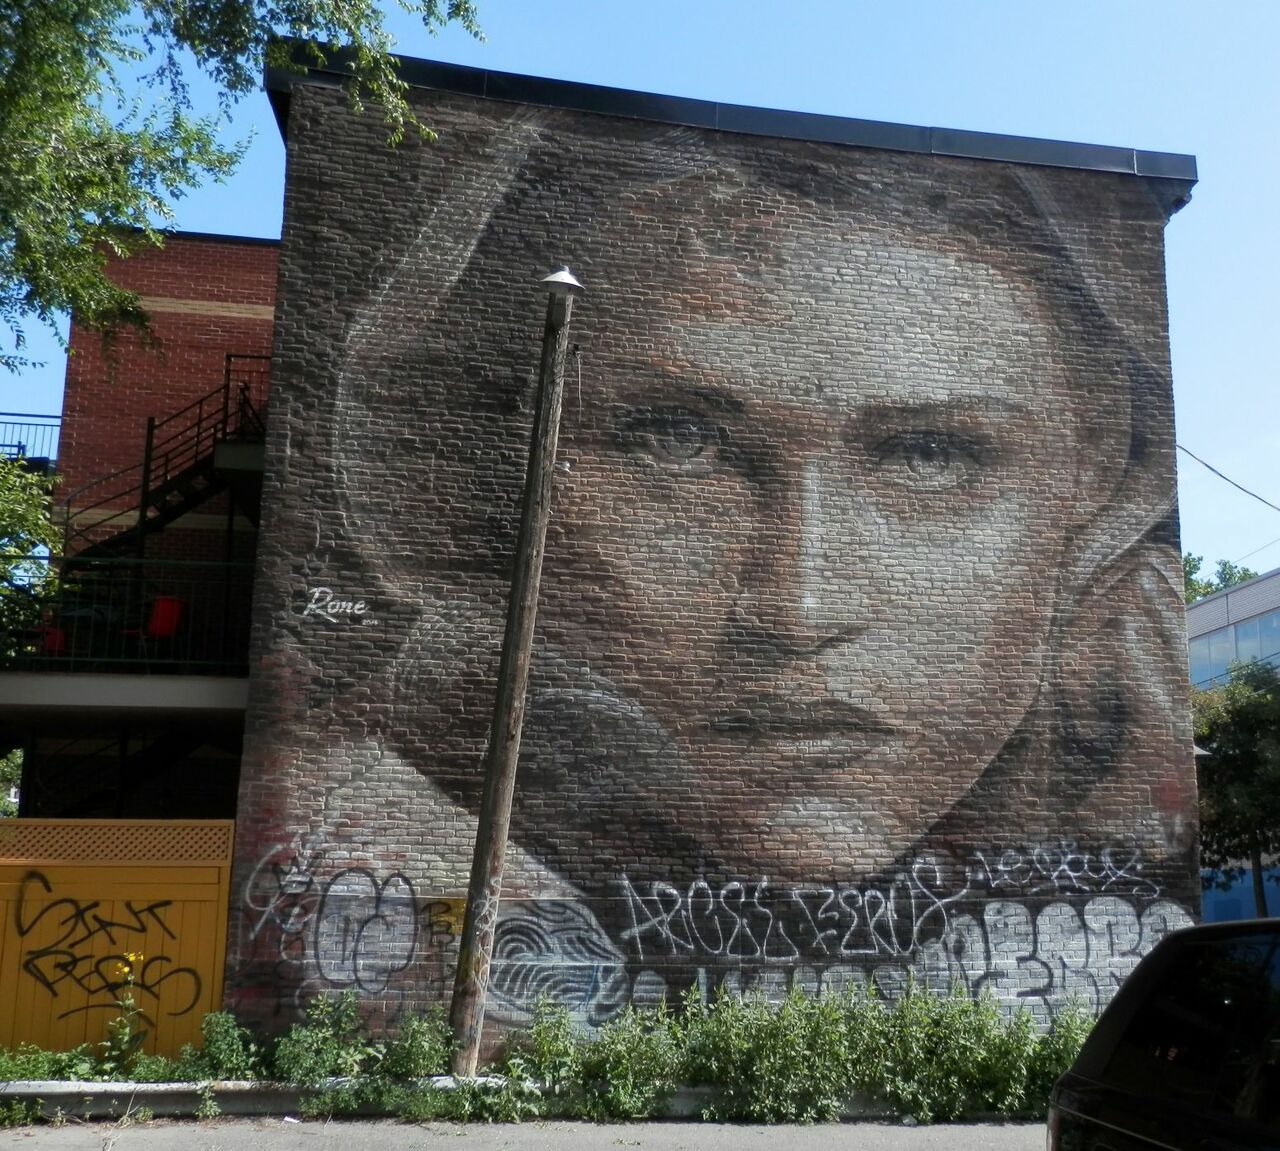 #StreetartSaturday Found this stunning #Montreal #Streetart by Rone ... could've looked at those eyes for hours. https://t.co/YkOT6dxXy6